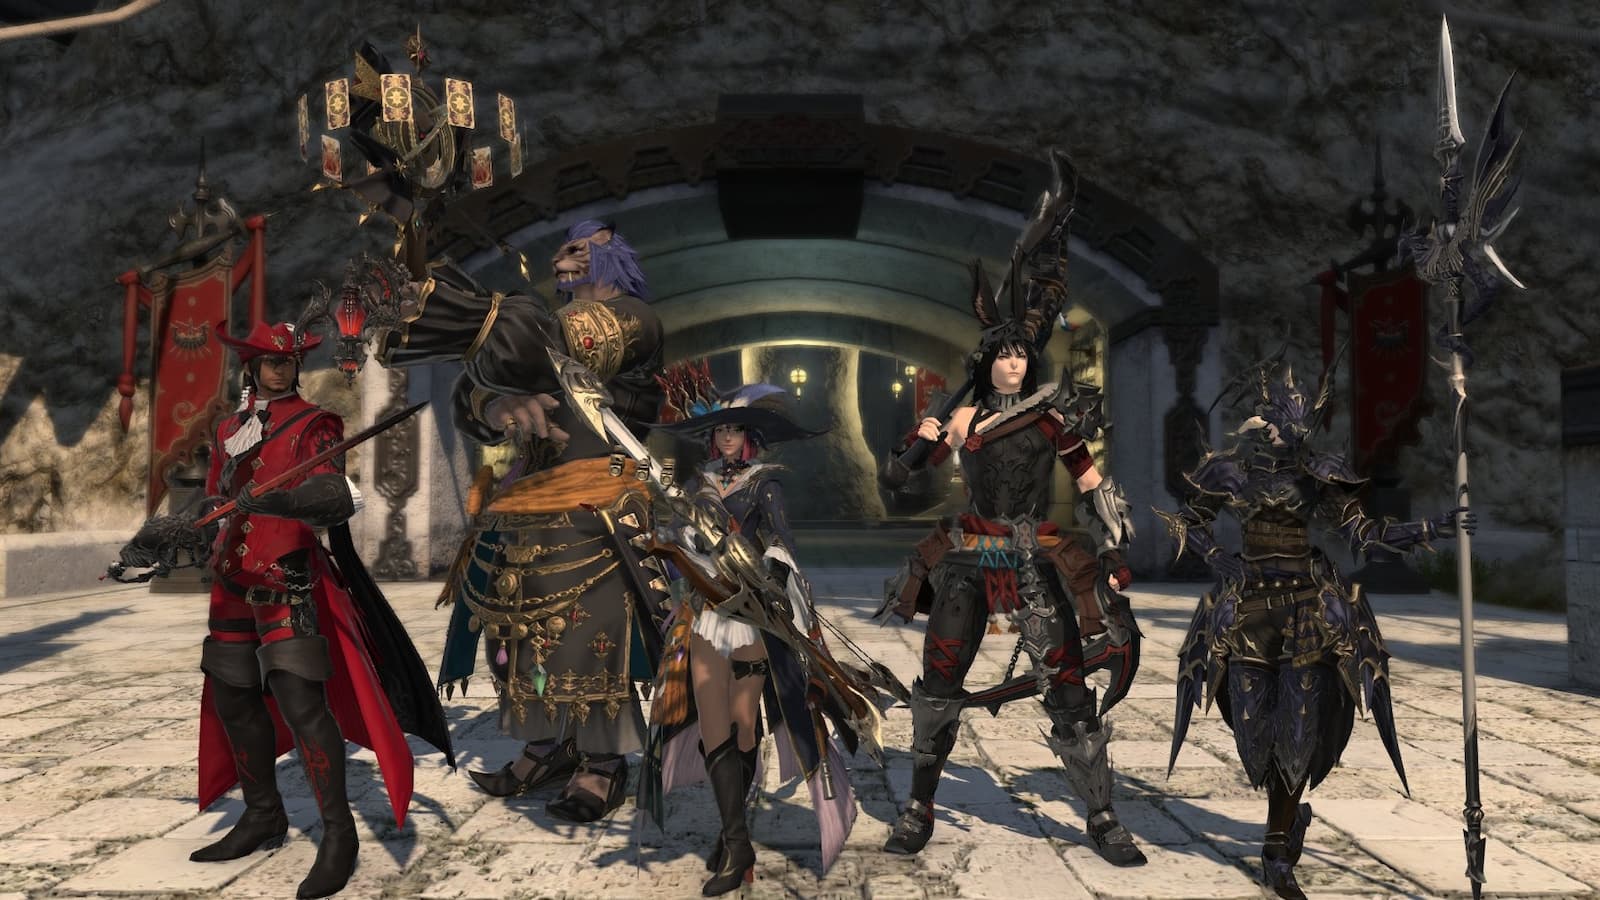 Final Fantasy 14 becomes way more immersive with this one setting disabled